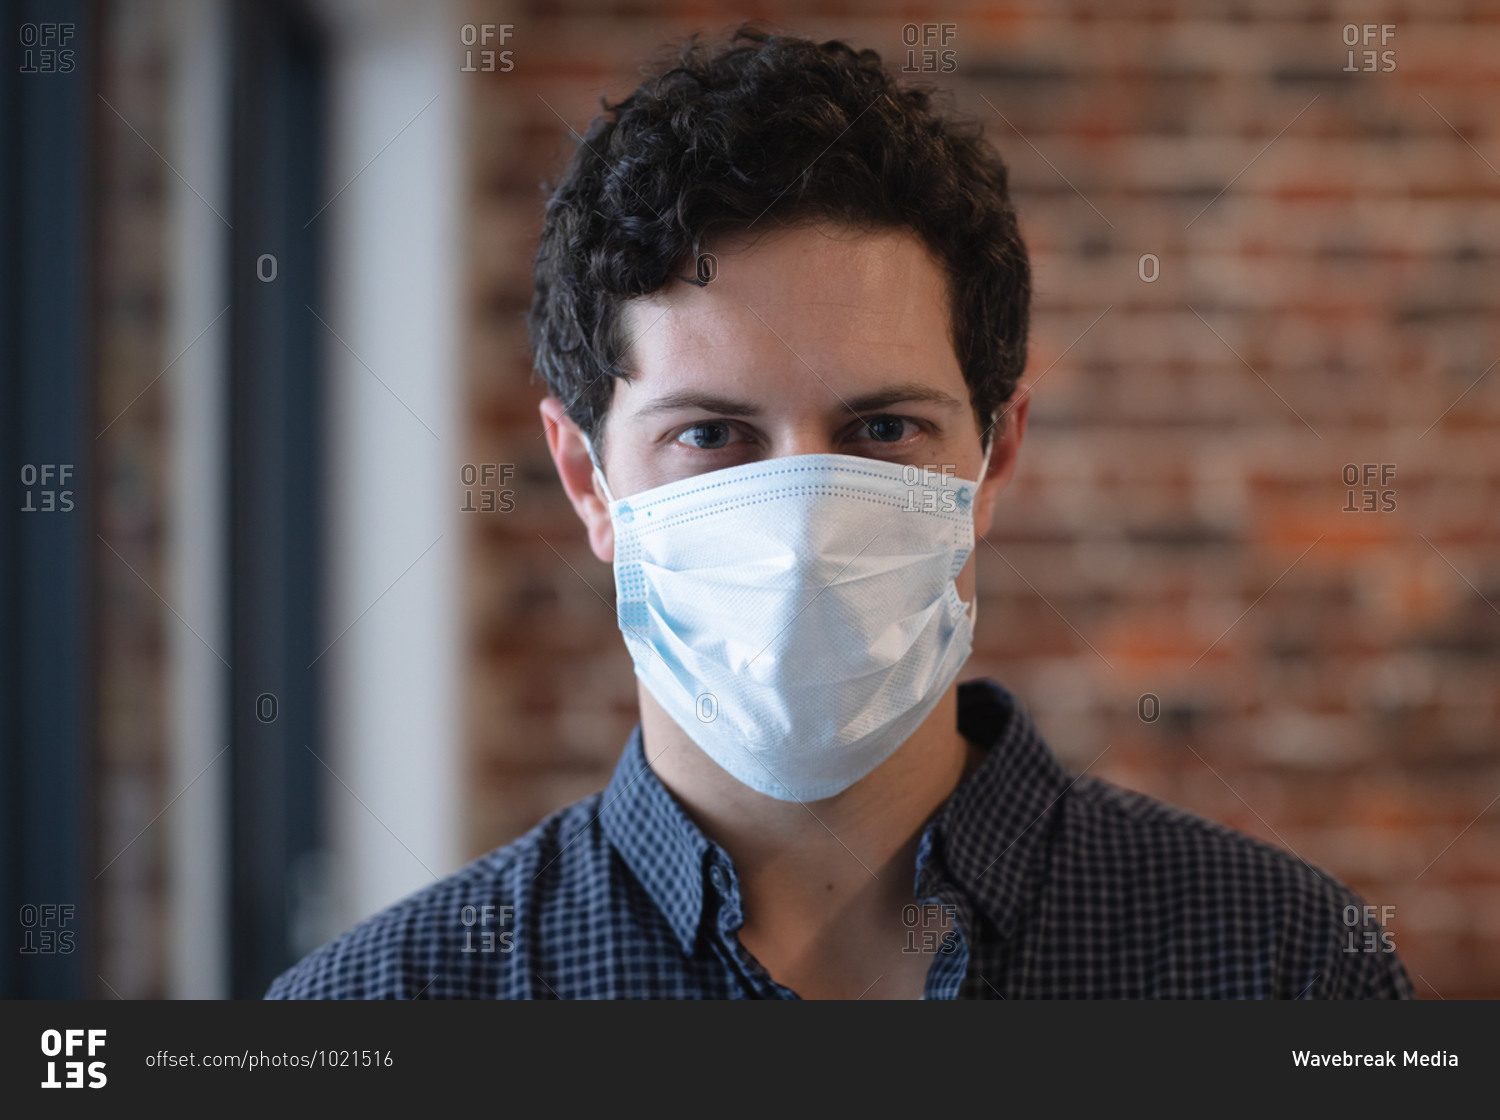 Portrait of Caucasian man working in a casual office, wearing face mask and looking at camera. Social distancing in the workplace during Coronavirus Covid 19 pandemic.